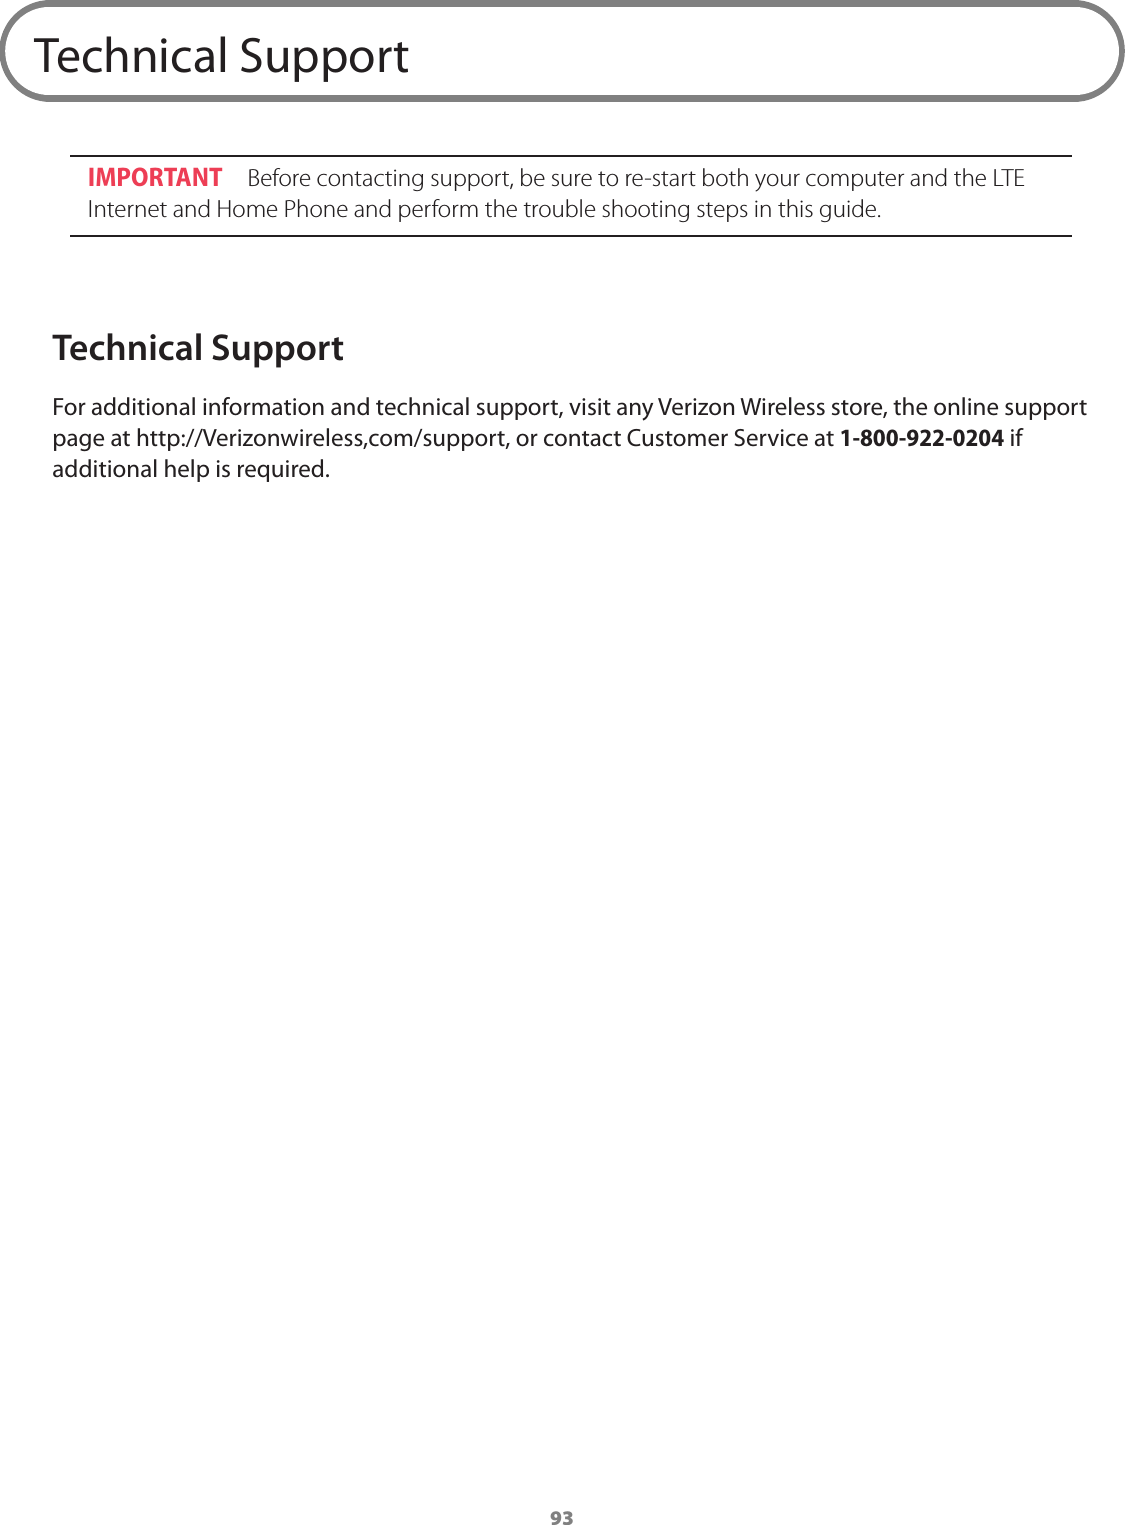 93Technical SupportIMPORTANT  Before contacting support, be sure to re-start both your computer and the LTE Internet and Home Phone and perform the trouble shooting steps in this guide.Technical SupportFor additional information and technical support, visit any Verizon Wireless store, the online support page at http://Verizonwireless,com/support, or contact Customer Service at 1-800-922-0204 if additional help is required. 